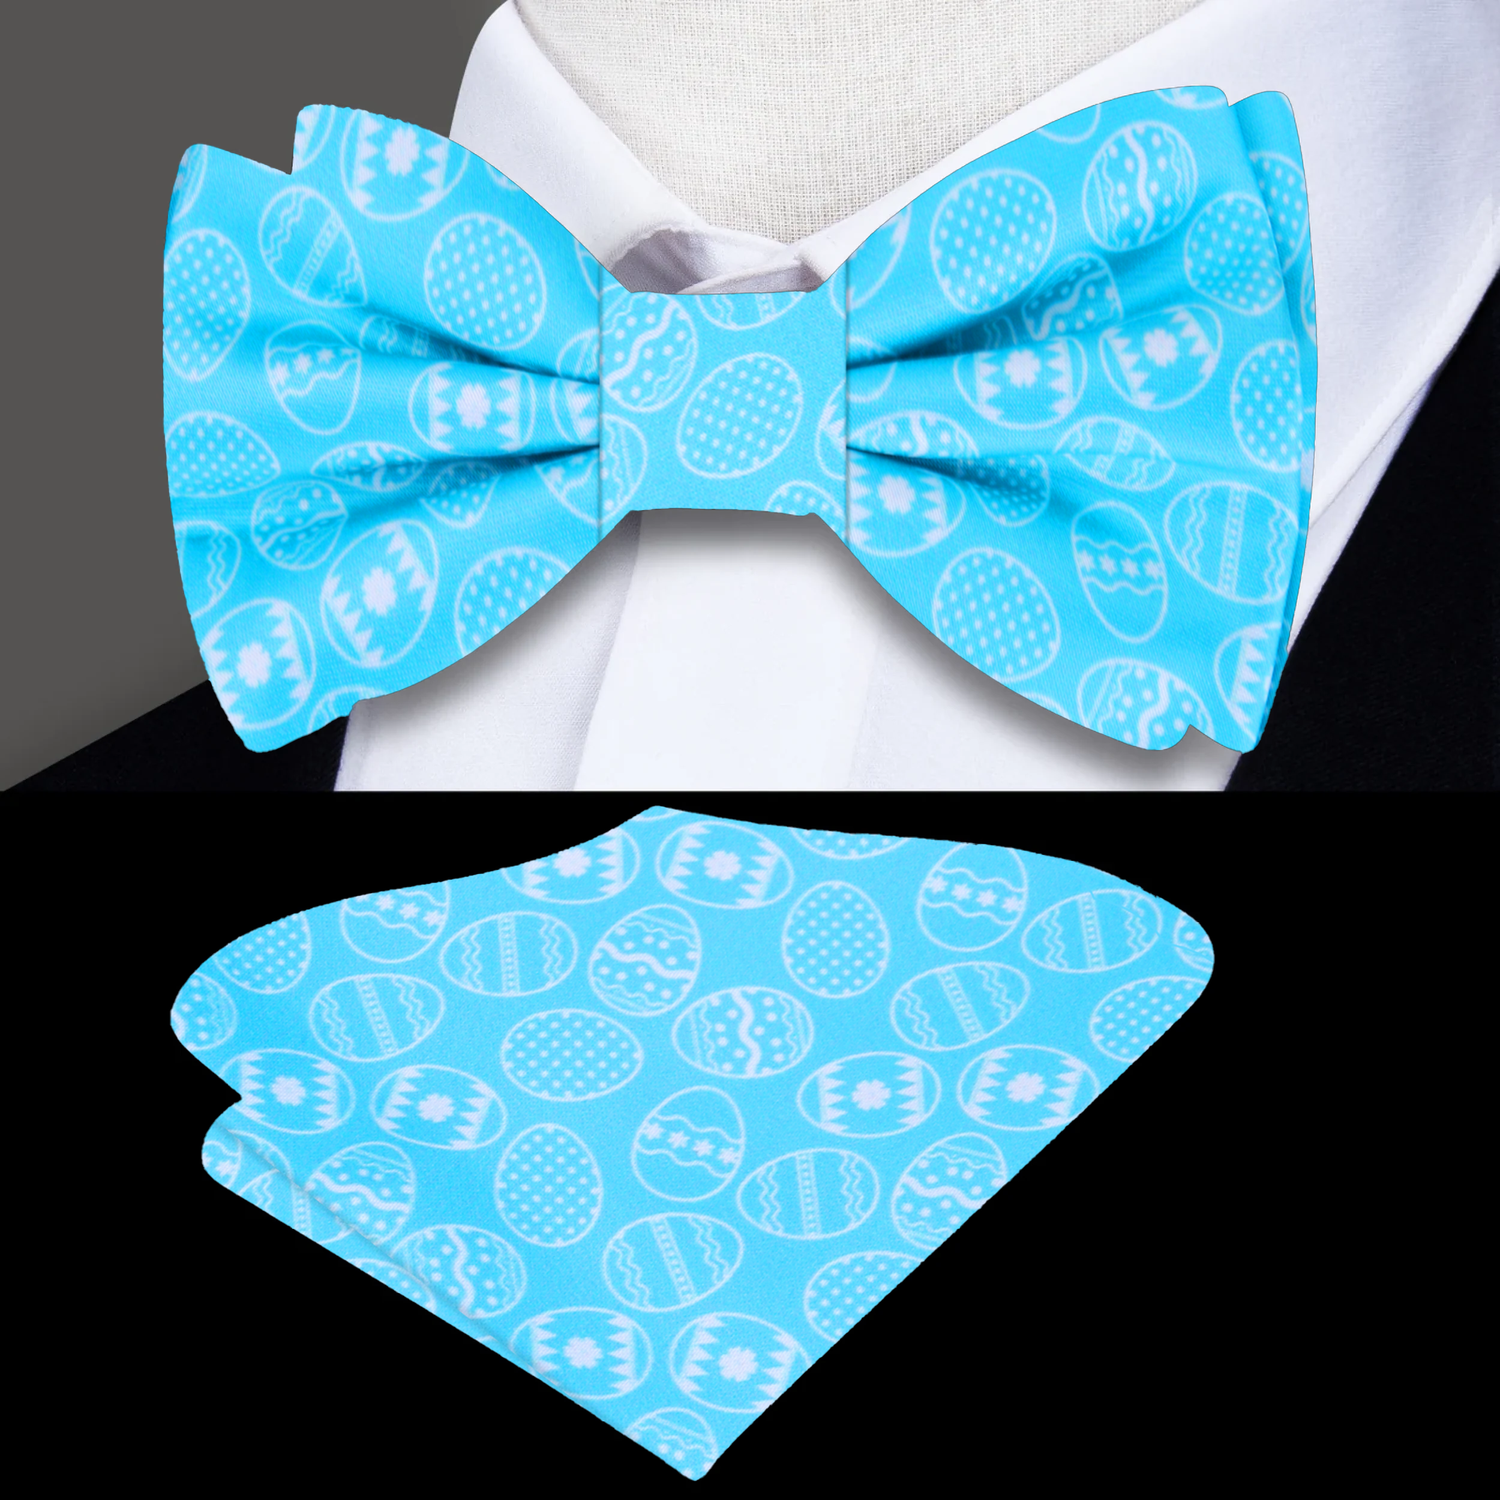 Bright Blue Easter Eggs Bow Tie and Pocket Square